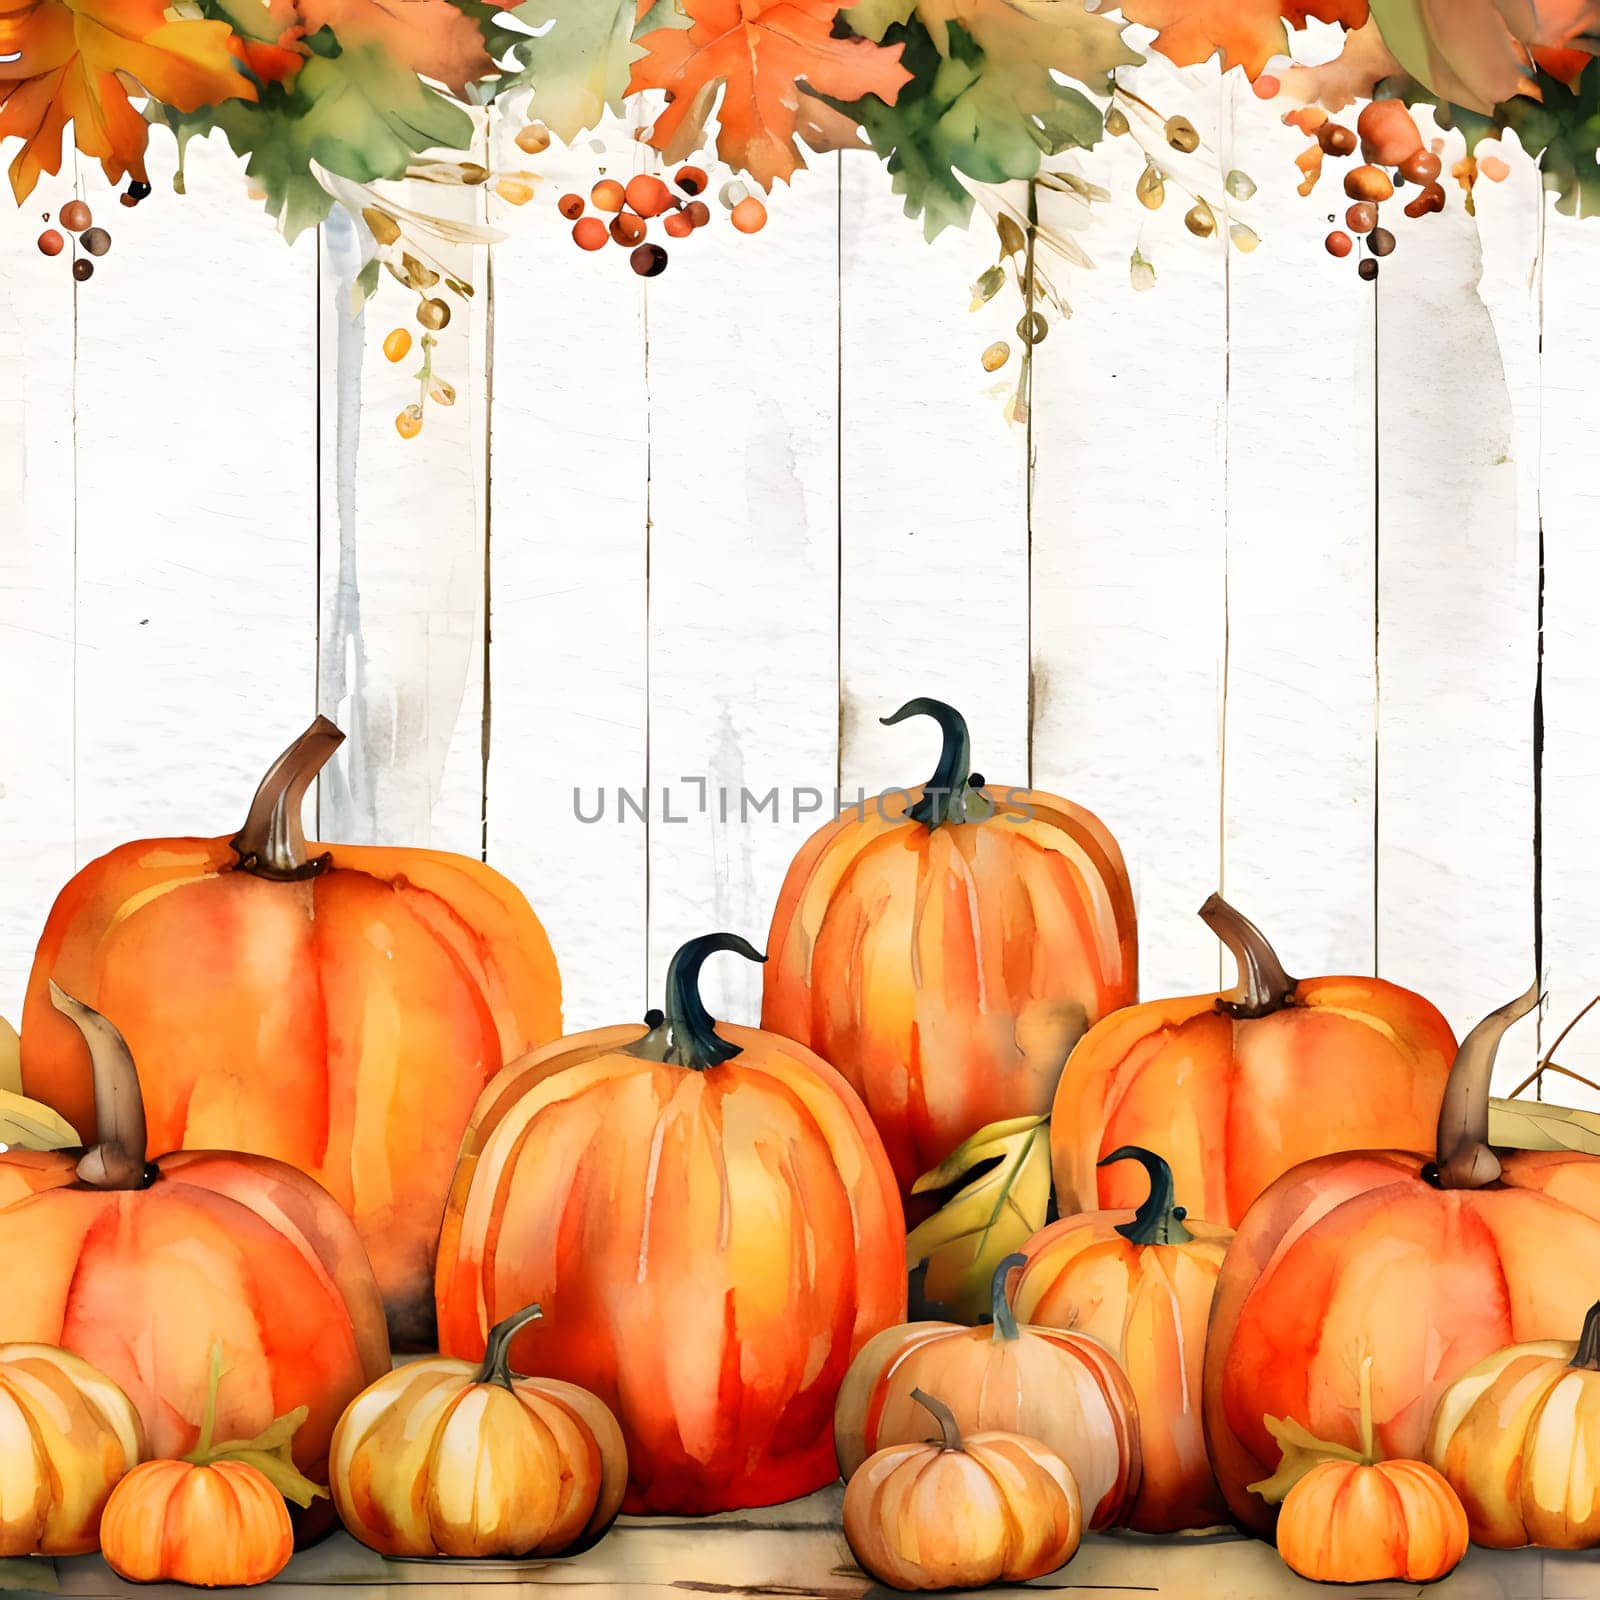 A paper frame embellished with pumpkins and leaves against a light background forms an elegant and visually appealing composition.